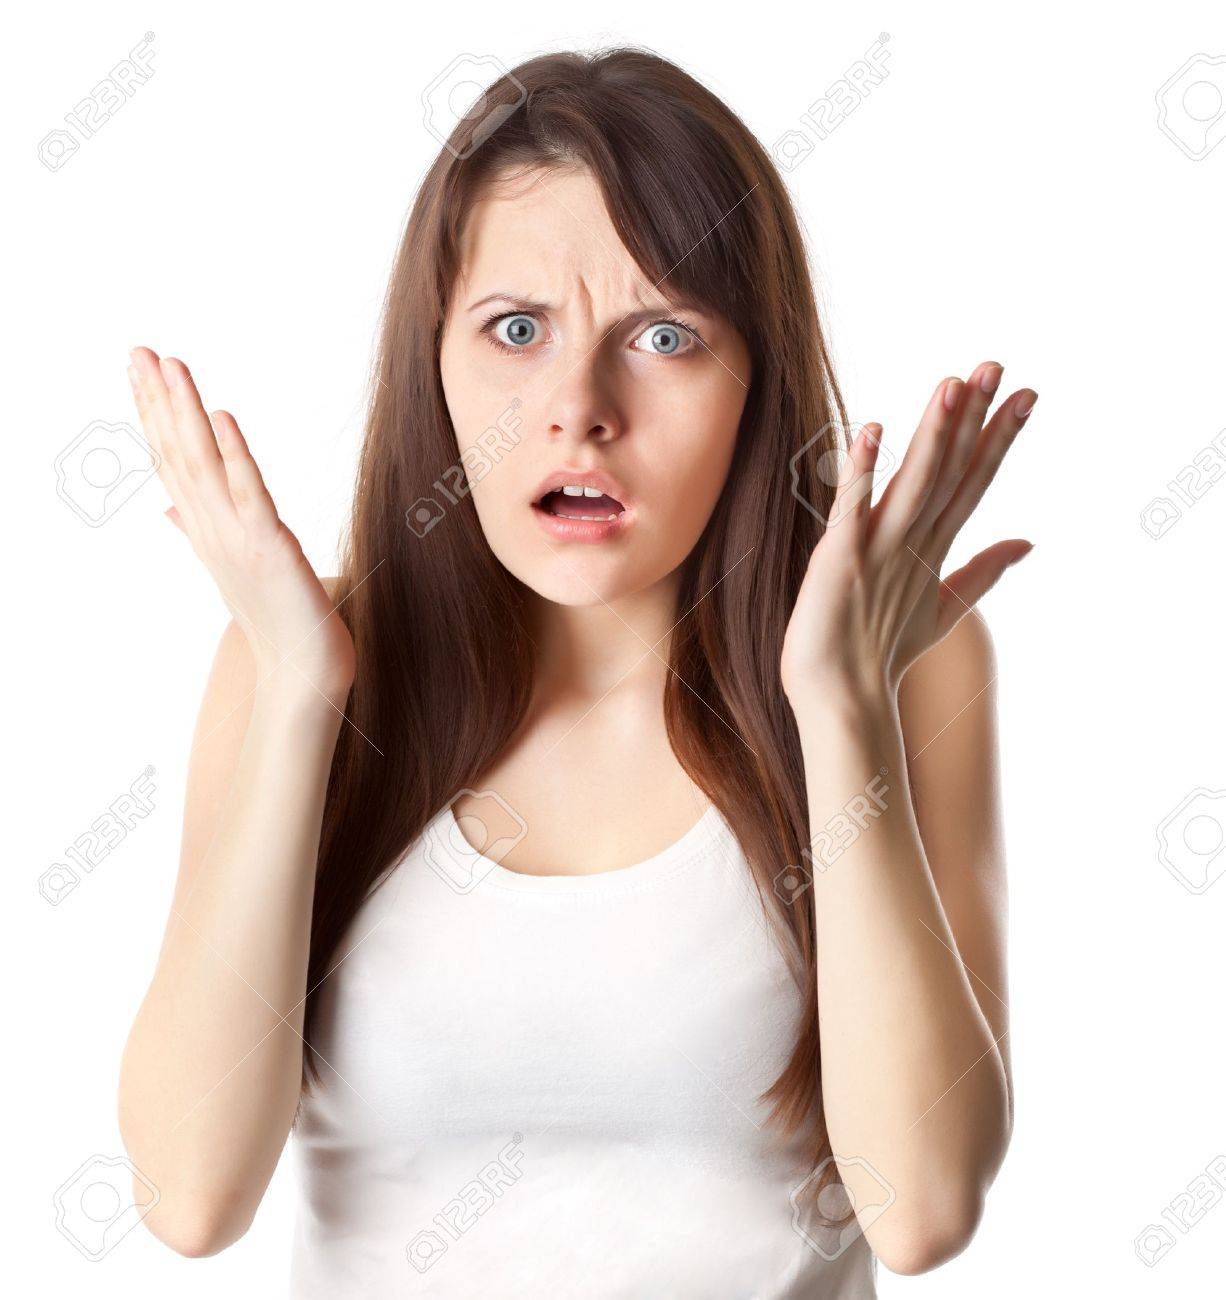 Shocked Woman In White T Shirt Studio Shot Isolated On